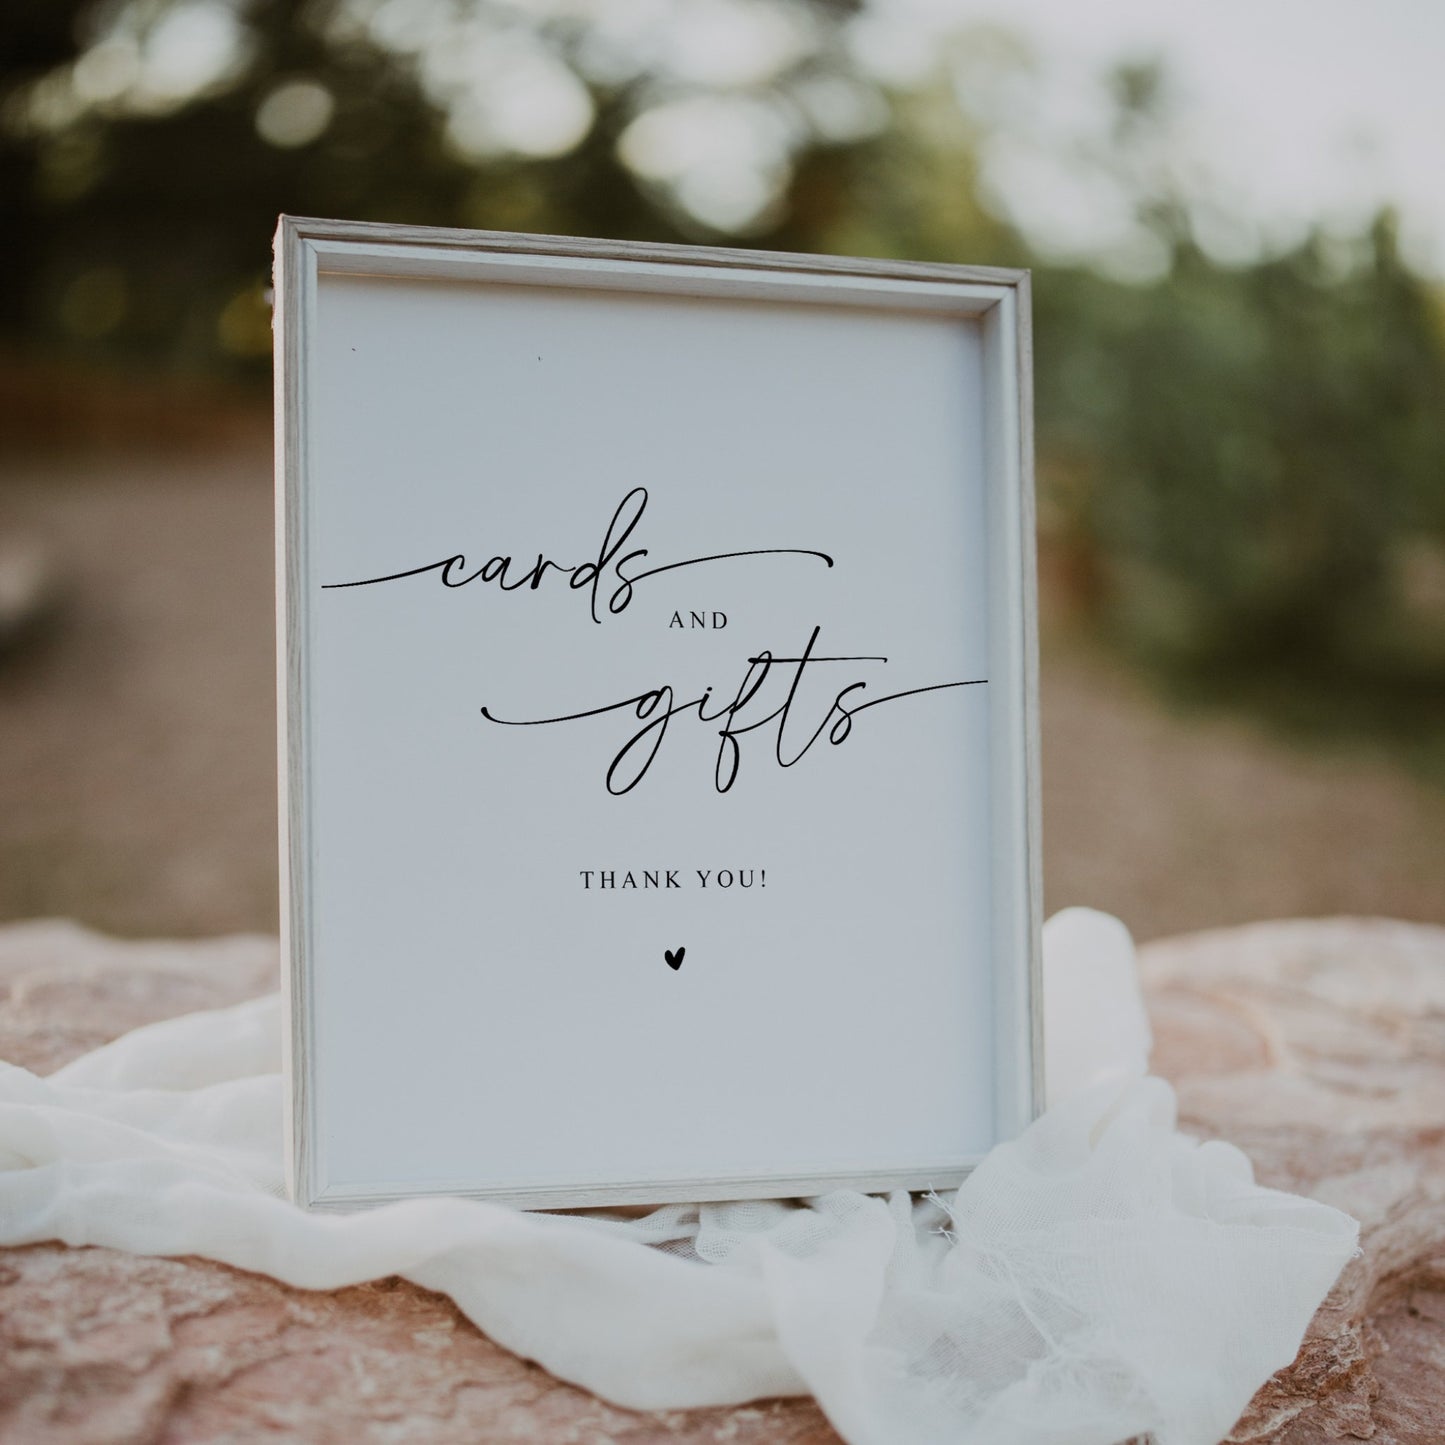 Modern Minimalist Bridal Shower Cards And Gifts Sign - SincerelyByNicole